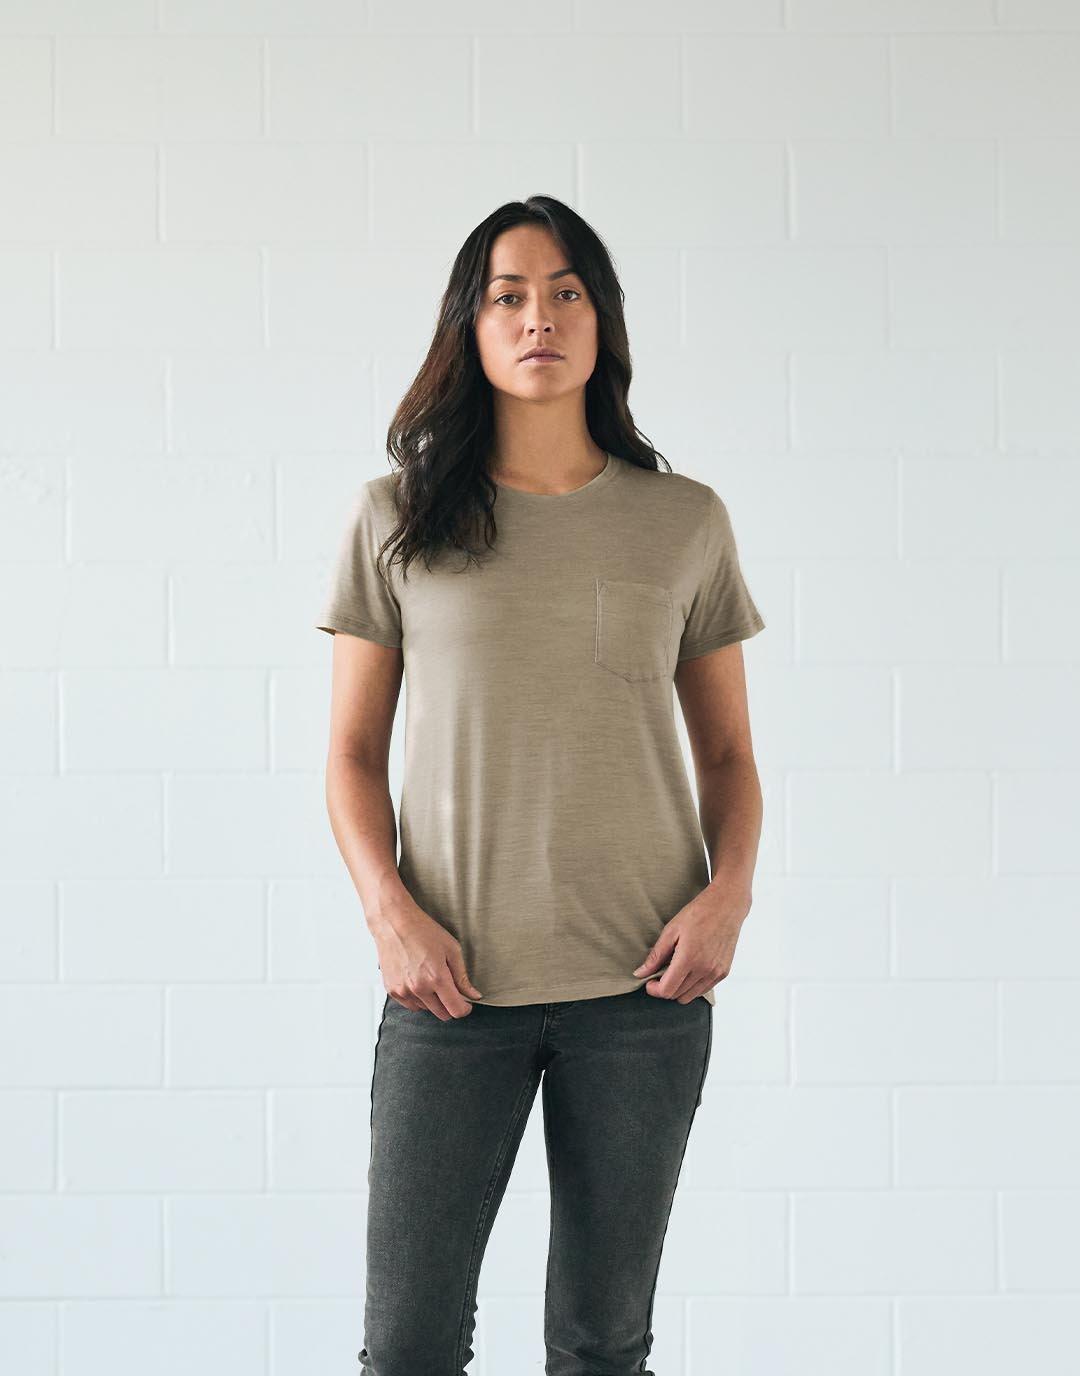 Woman standing wearing a t-shirt dyed using natural, sustainably sourced plant pigments.